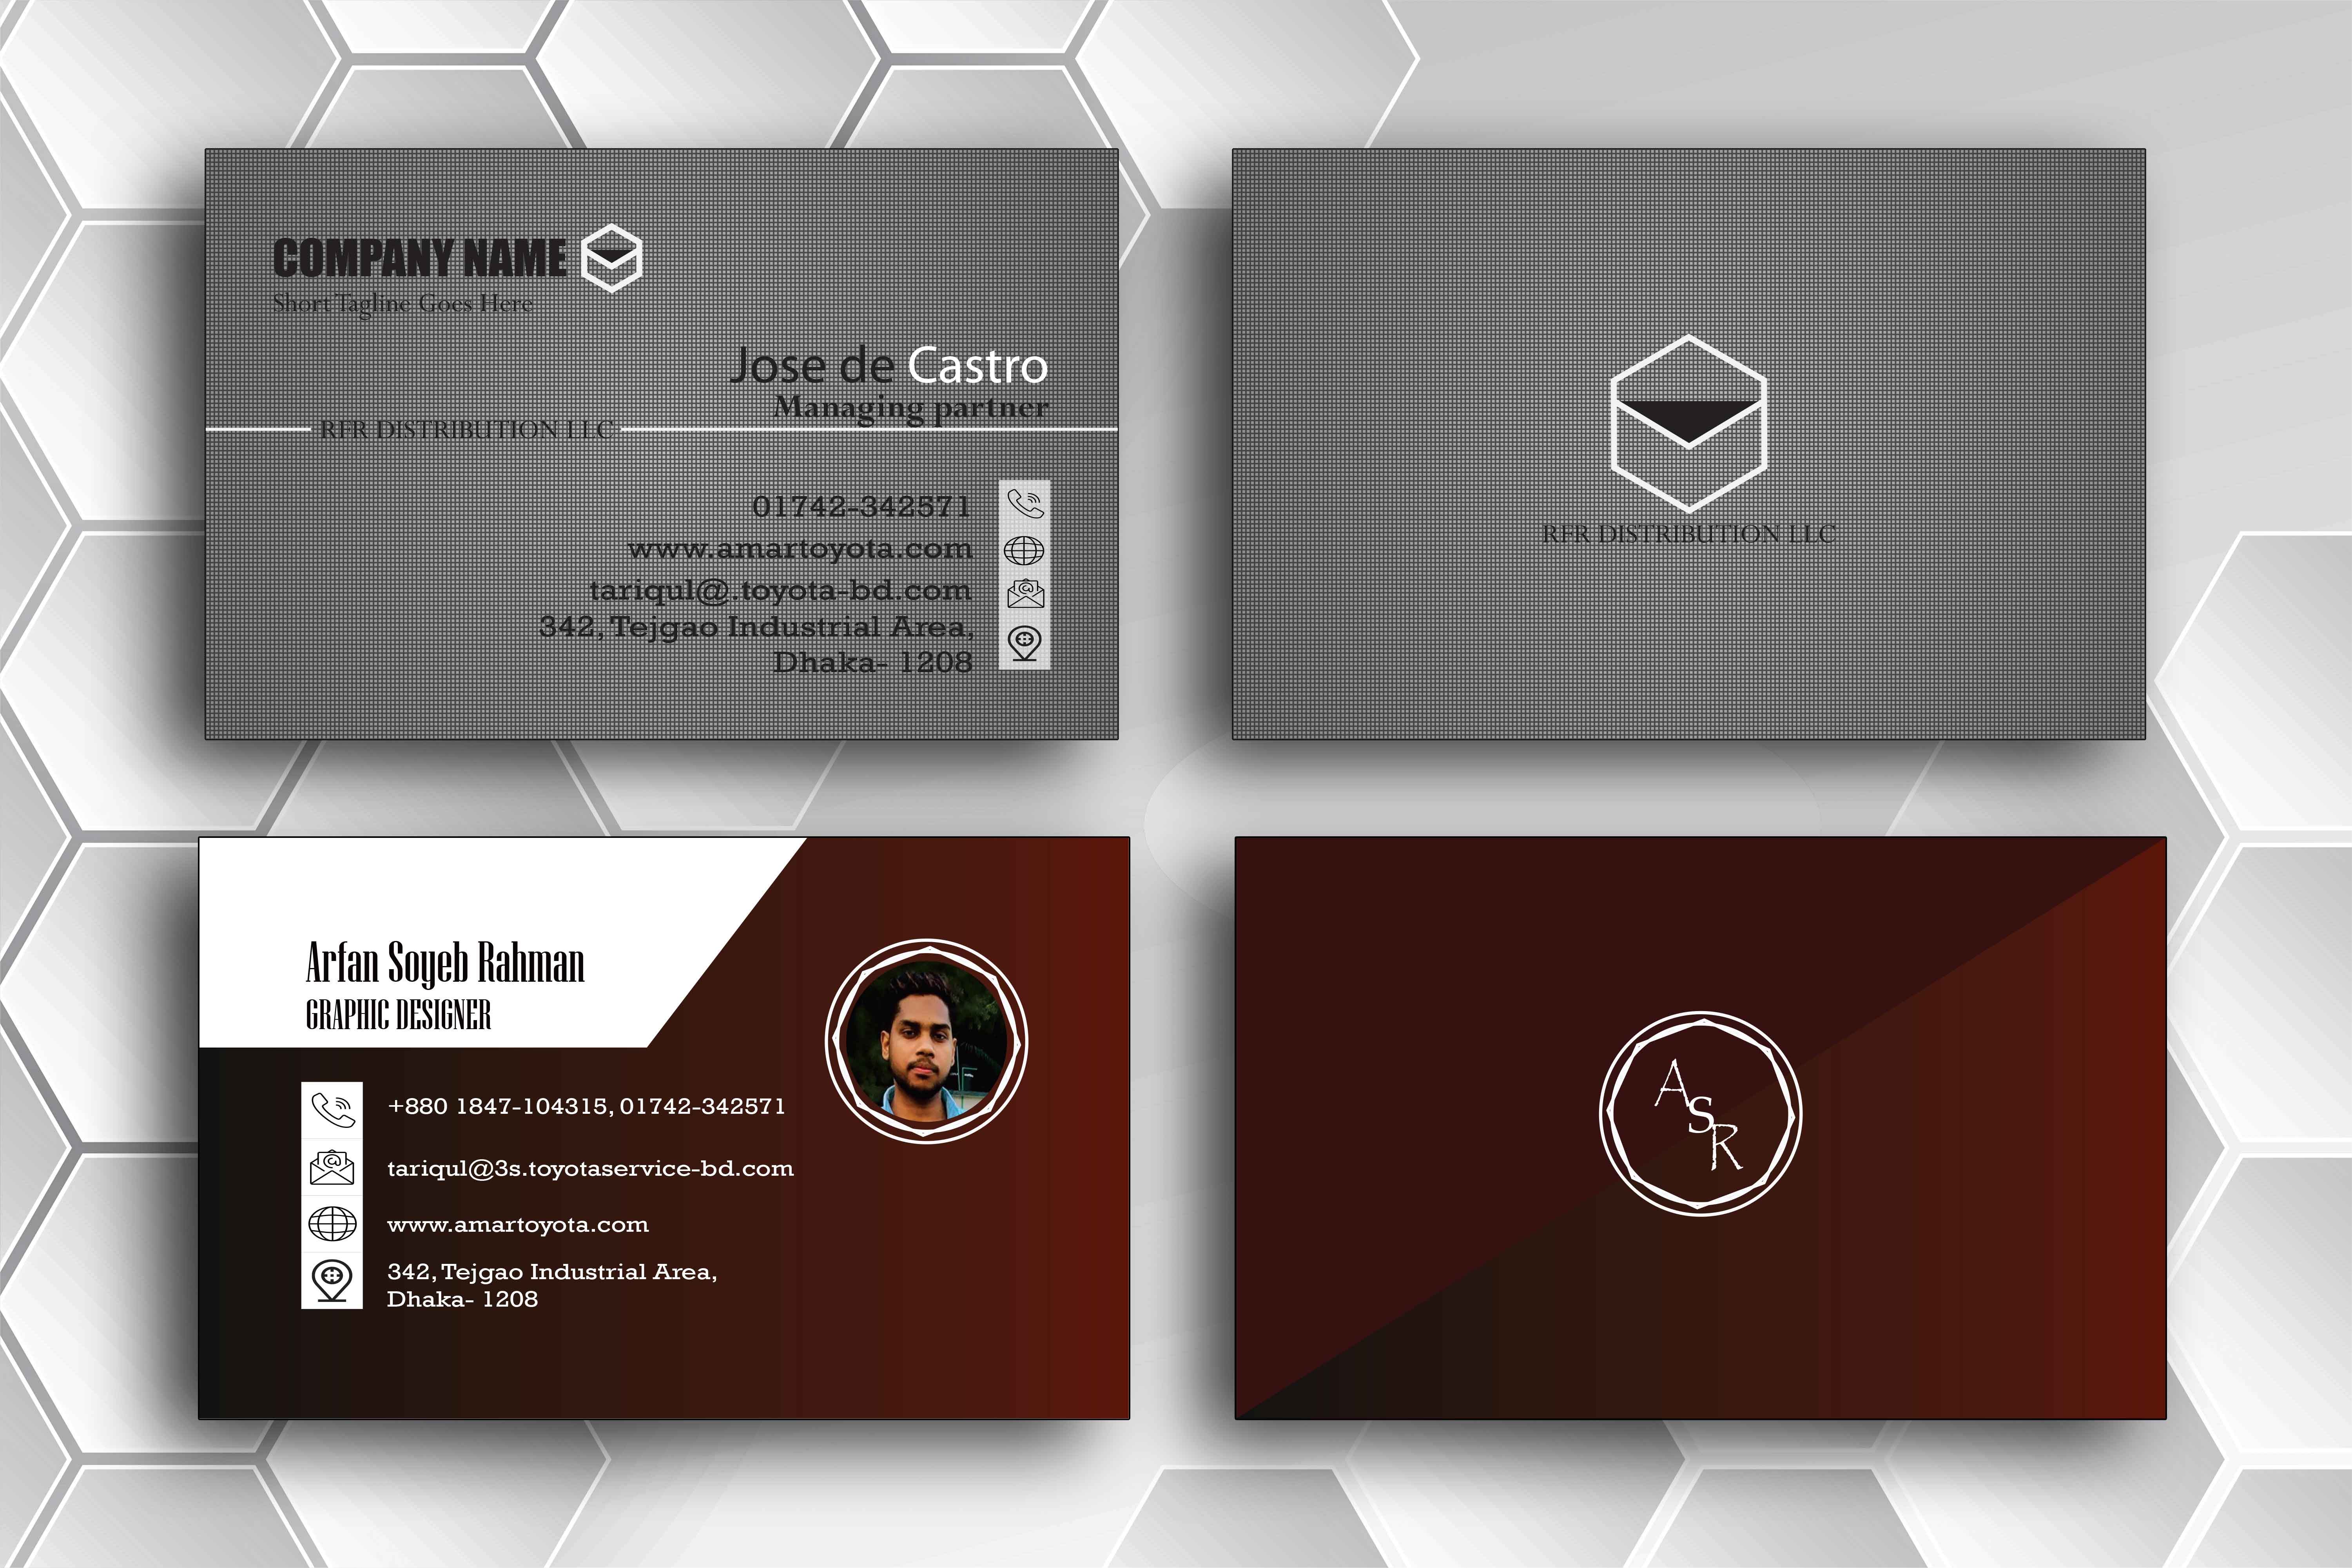 I will provide professional and creative business card design 